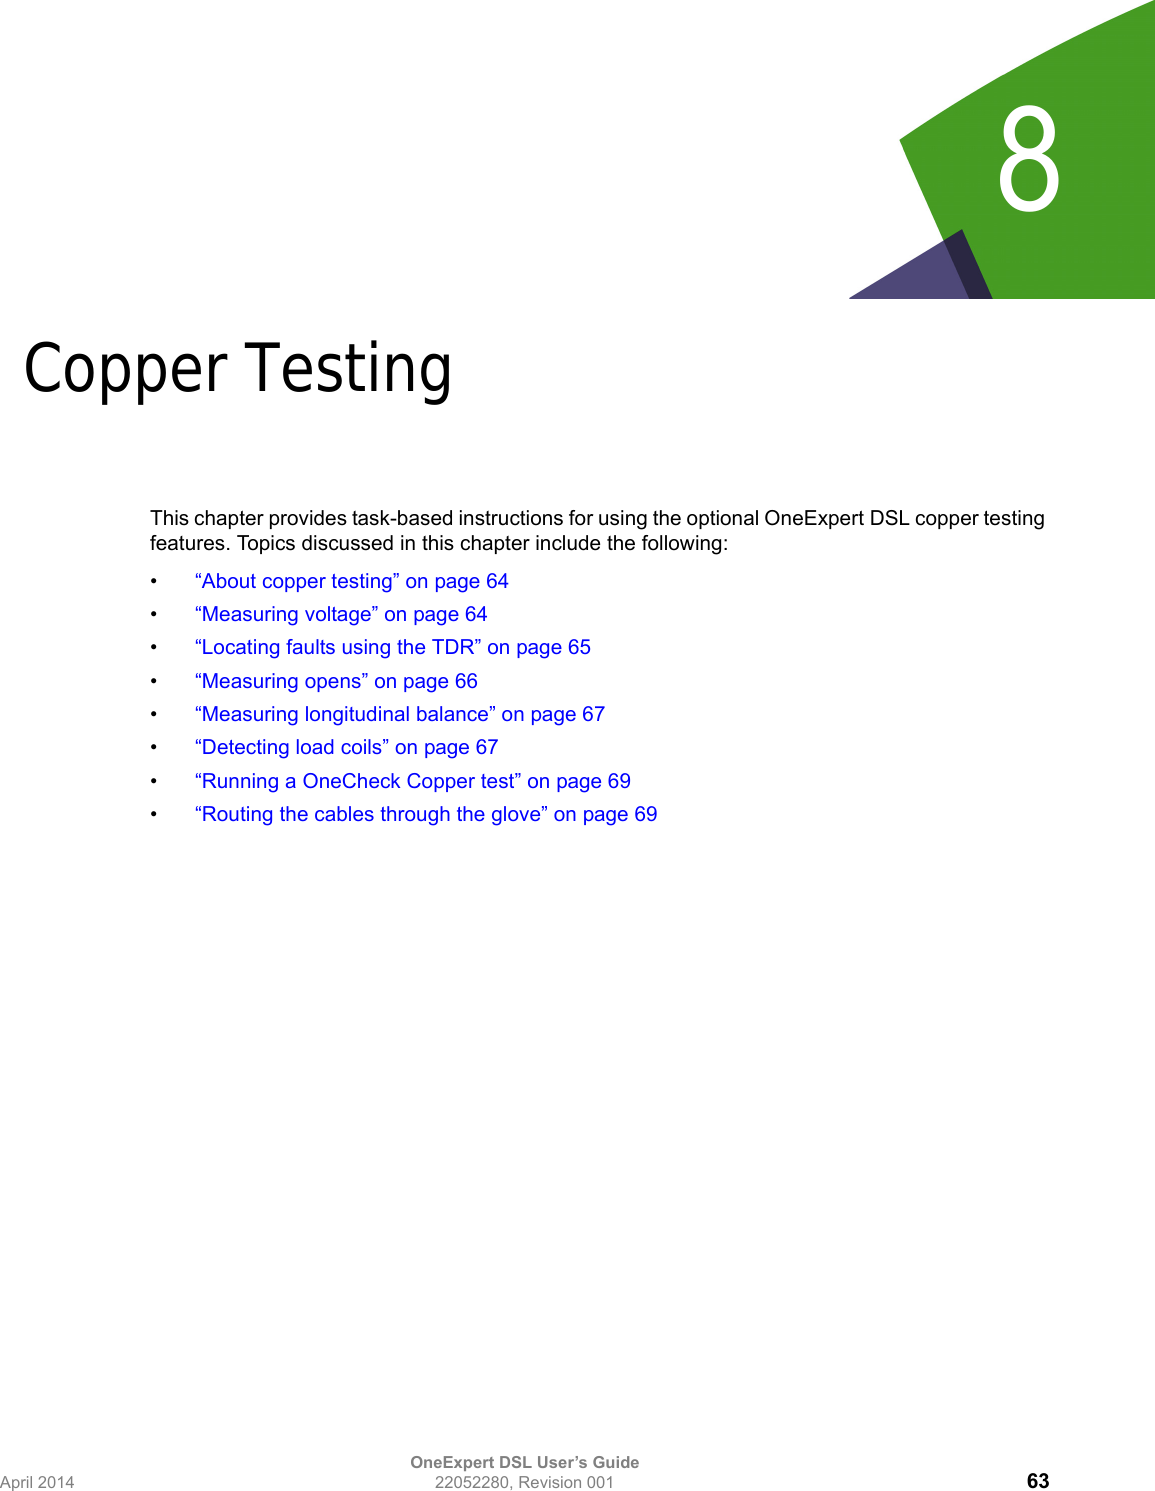 OneExpert DSL User’s GuideApril 2014 22052280, Revision 001 638Chapter 8Copper TestingThis chapter provides task-based instructions for using the optional OneExpert DSL copper testing features. Topics discussed in this chapter include the following:•“About copper testing” on page 64•“Measuring voltage” on page 64•“Locating faults using the TDR” on page 65•“Measuring opens” on page 66•“Measuring longitudinal balance” on page 67•“Detecting load coils” on page 67•“Running a OneCheck Copper test” on page 69•“Routing the cables through the glove” on page 69